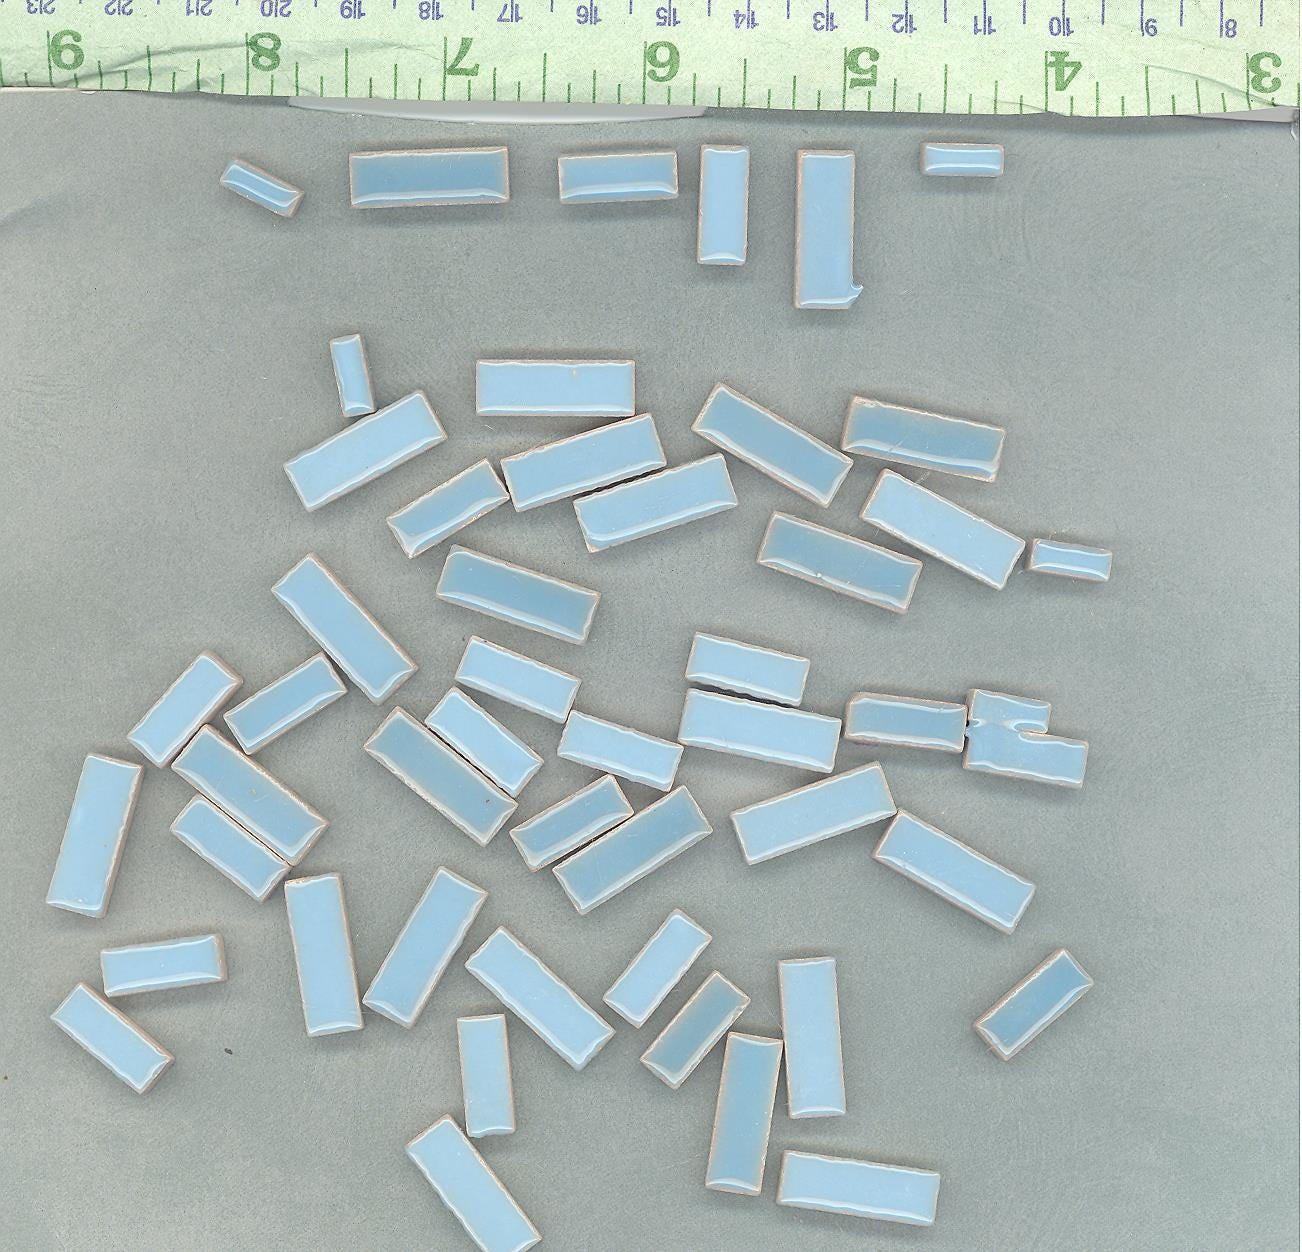 Light Blue Mini Rectangles Mosaic Tiles - 50g Ceramic in Mix of 3 Sizes 3/8" and 5/8" and 3/4" in Azure